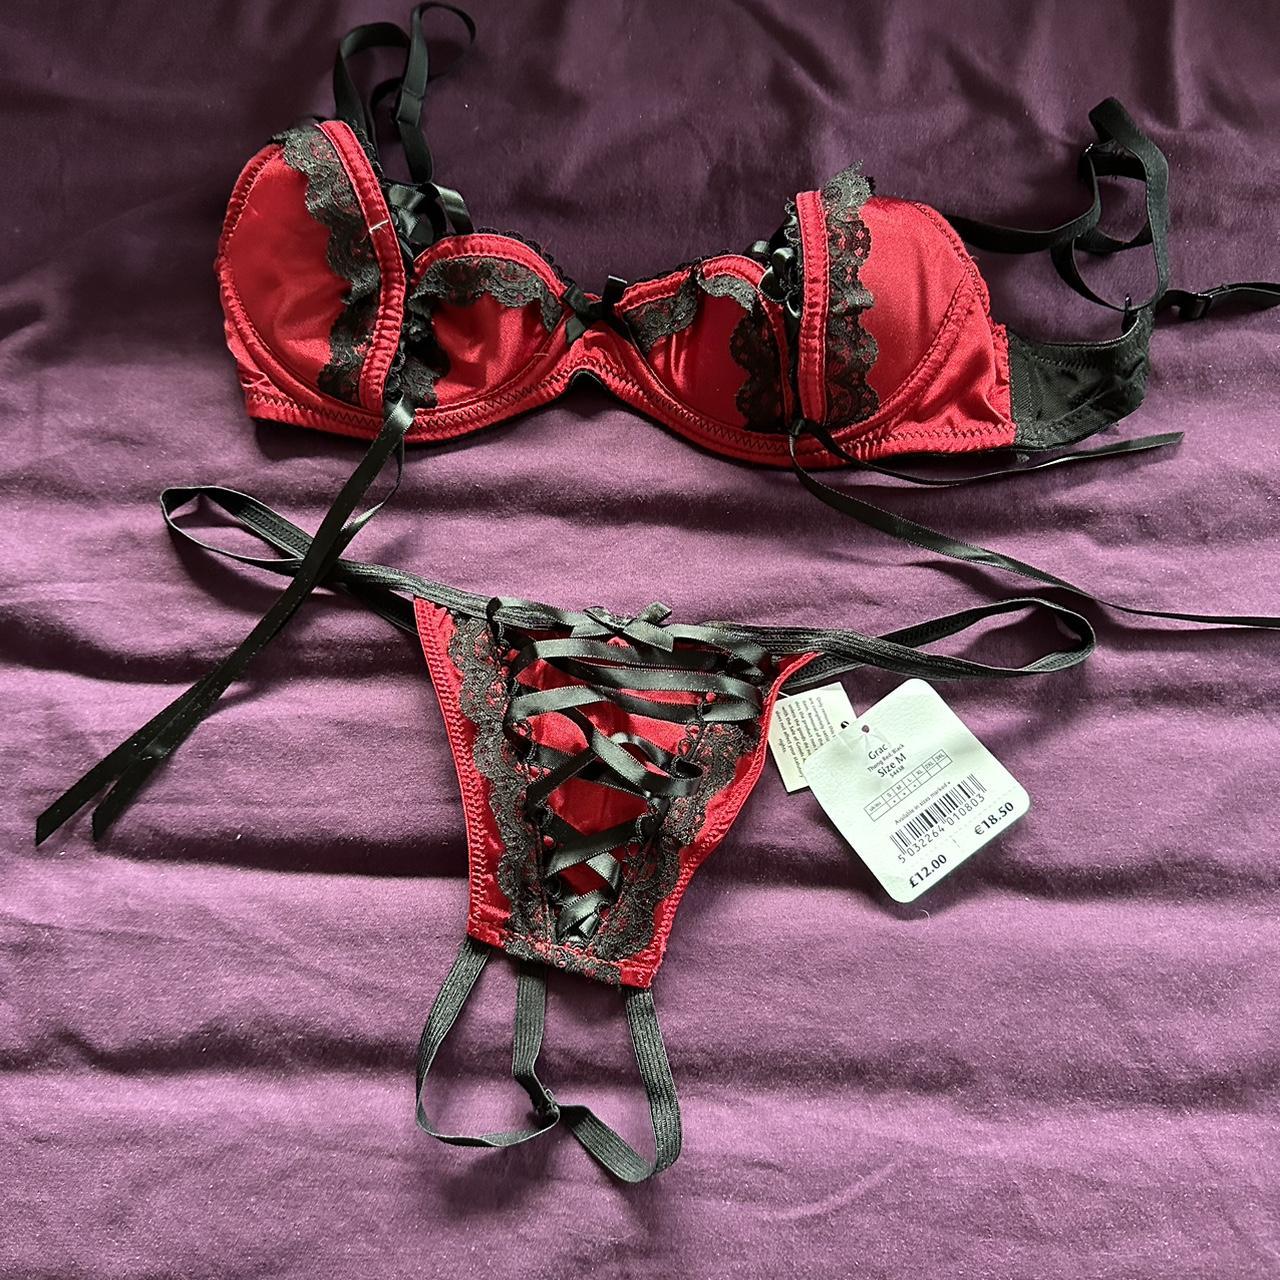 New with tags red & black Ann summers bra and - Depop